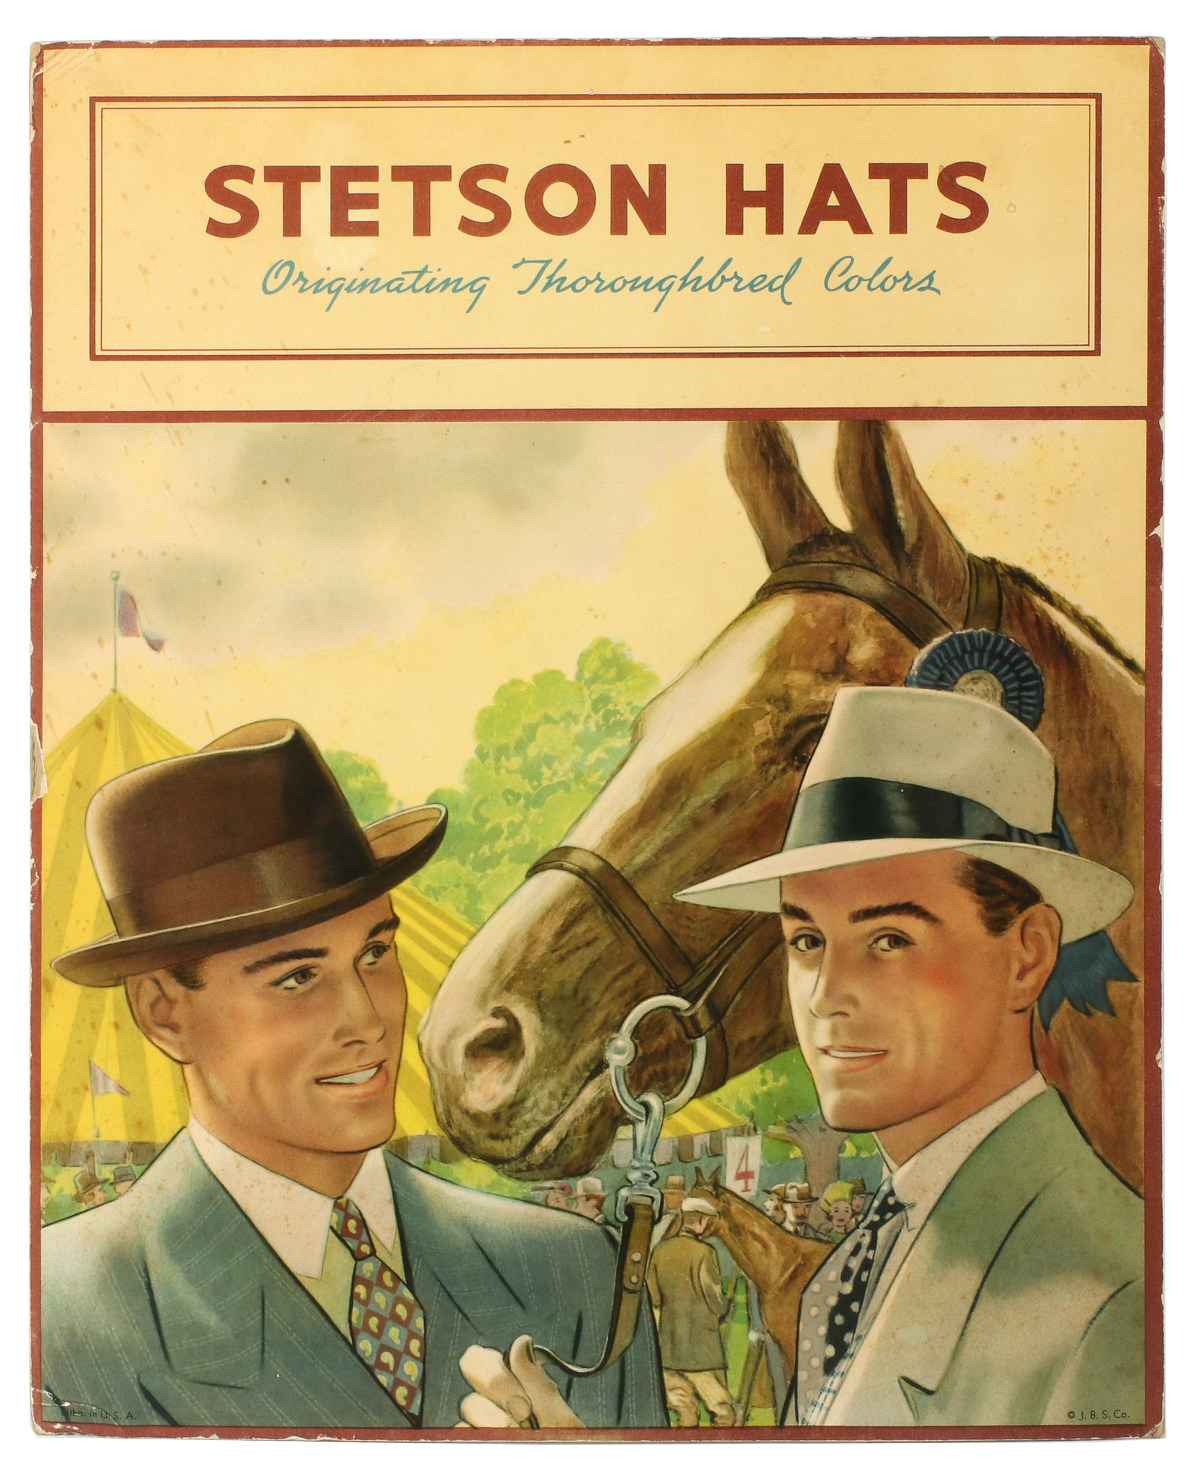 A 1938 STETSON HATS CARDBOARD STANDEE SIGN